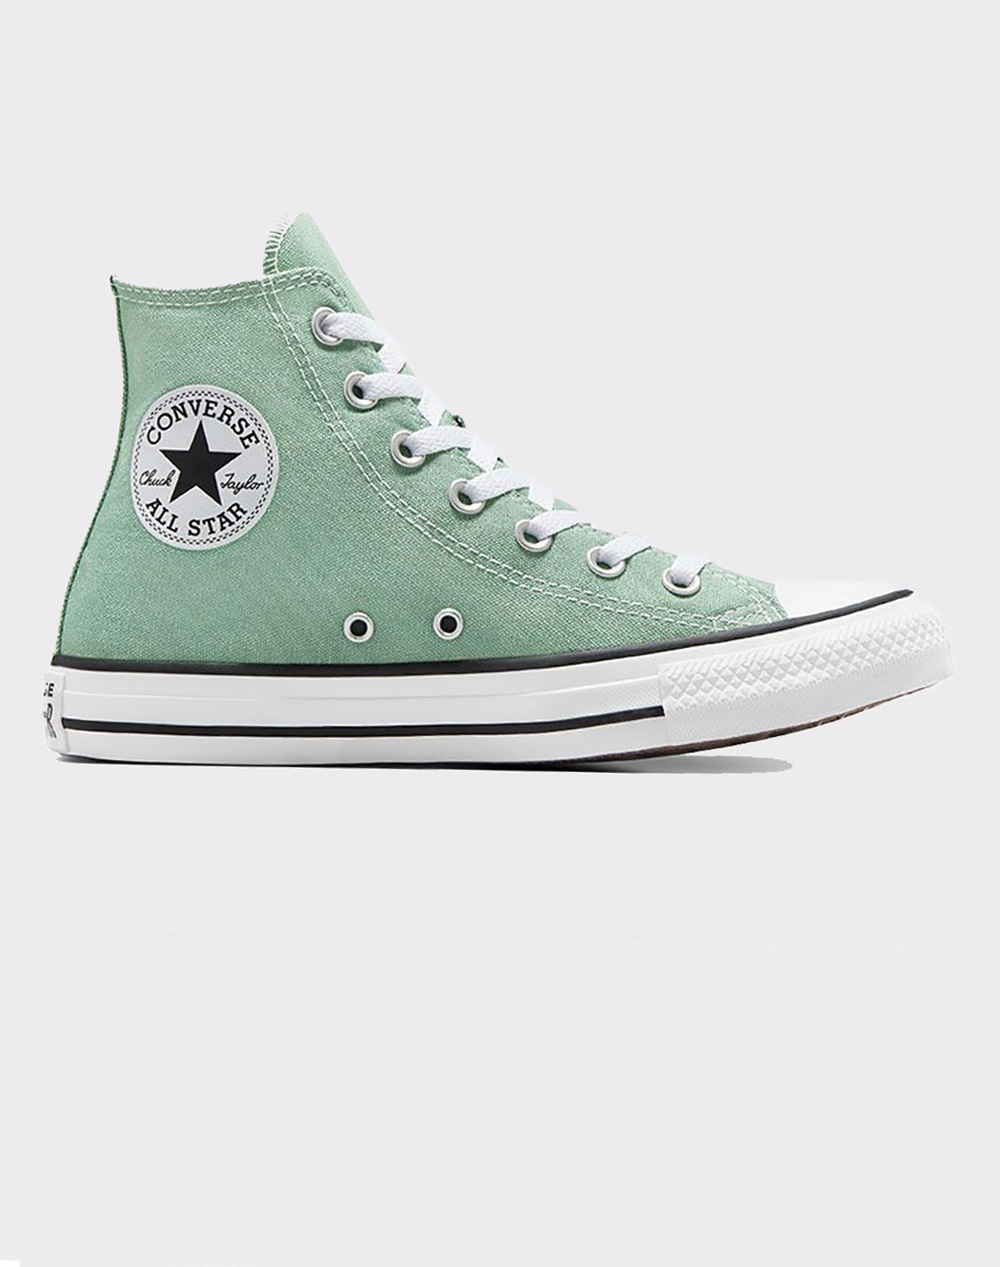 CONVERSE ΠΑΠΟΥΤΣΙΑ SNEAKERS HIGH TOP SNEAKERS A06563C-312 LightGreen